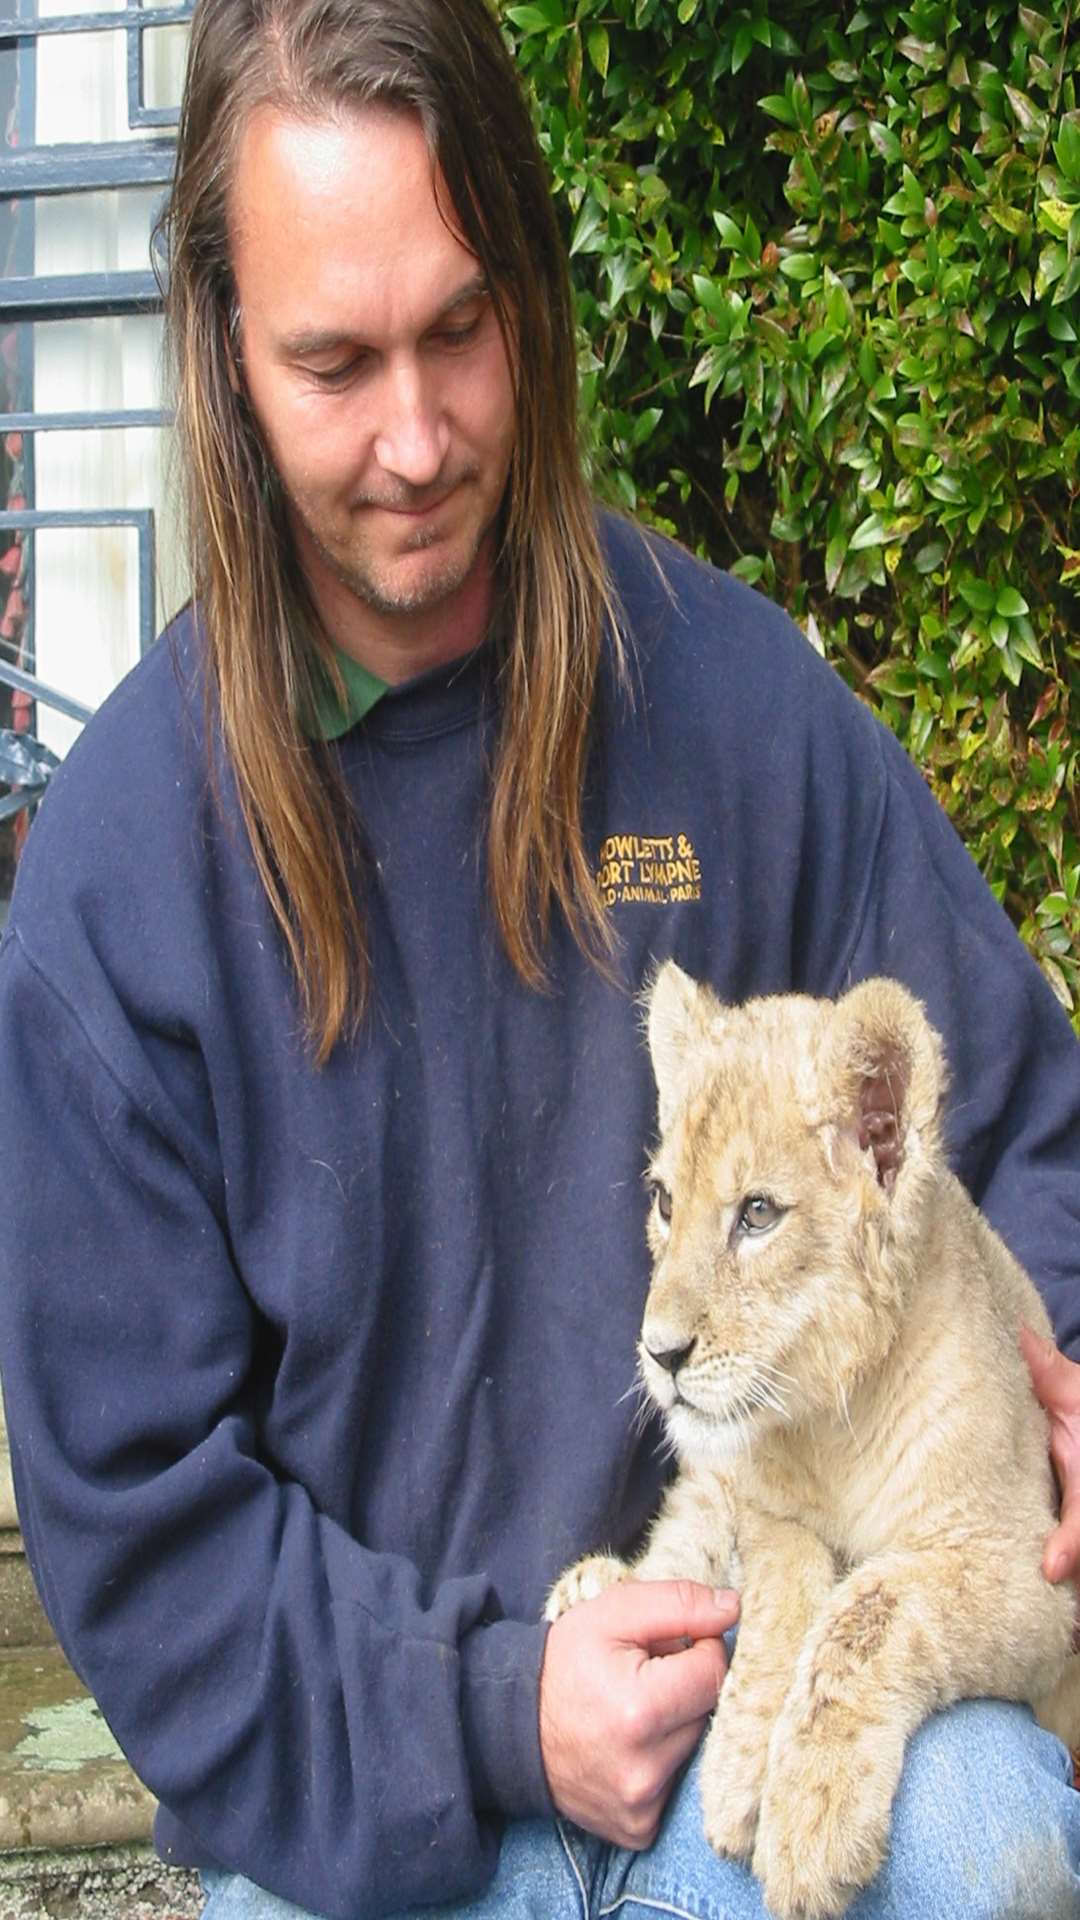 Samira as a cub with keeper Pete Thompson who hand reared her because of her injury